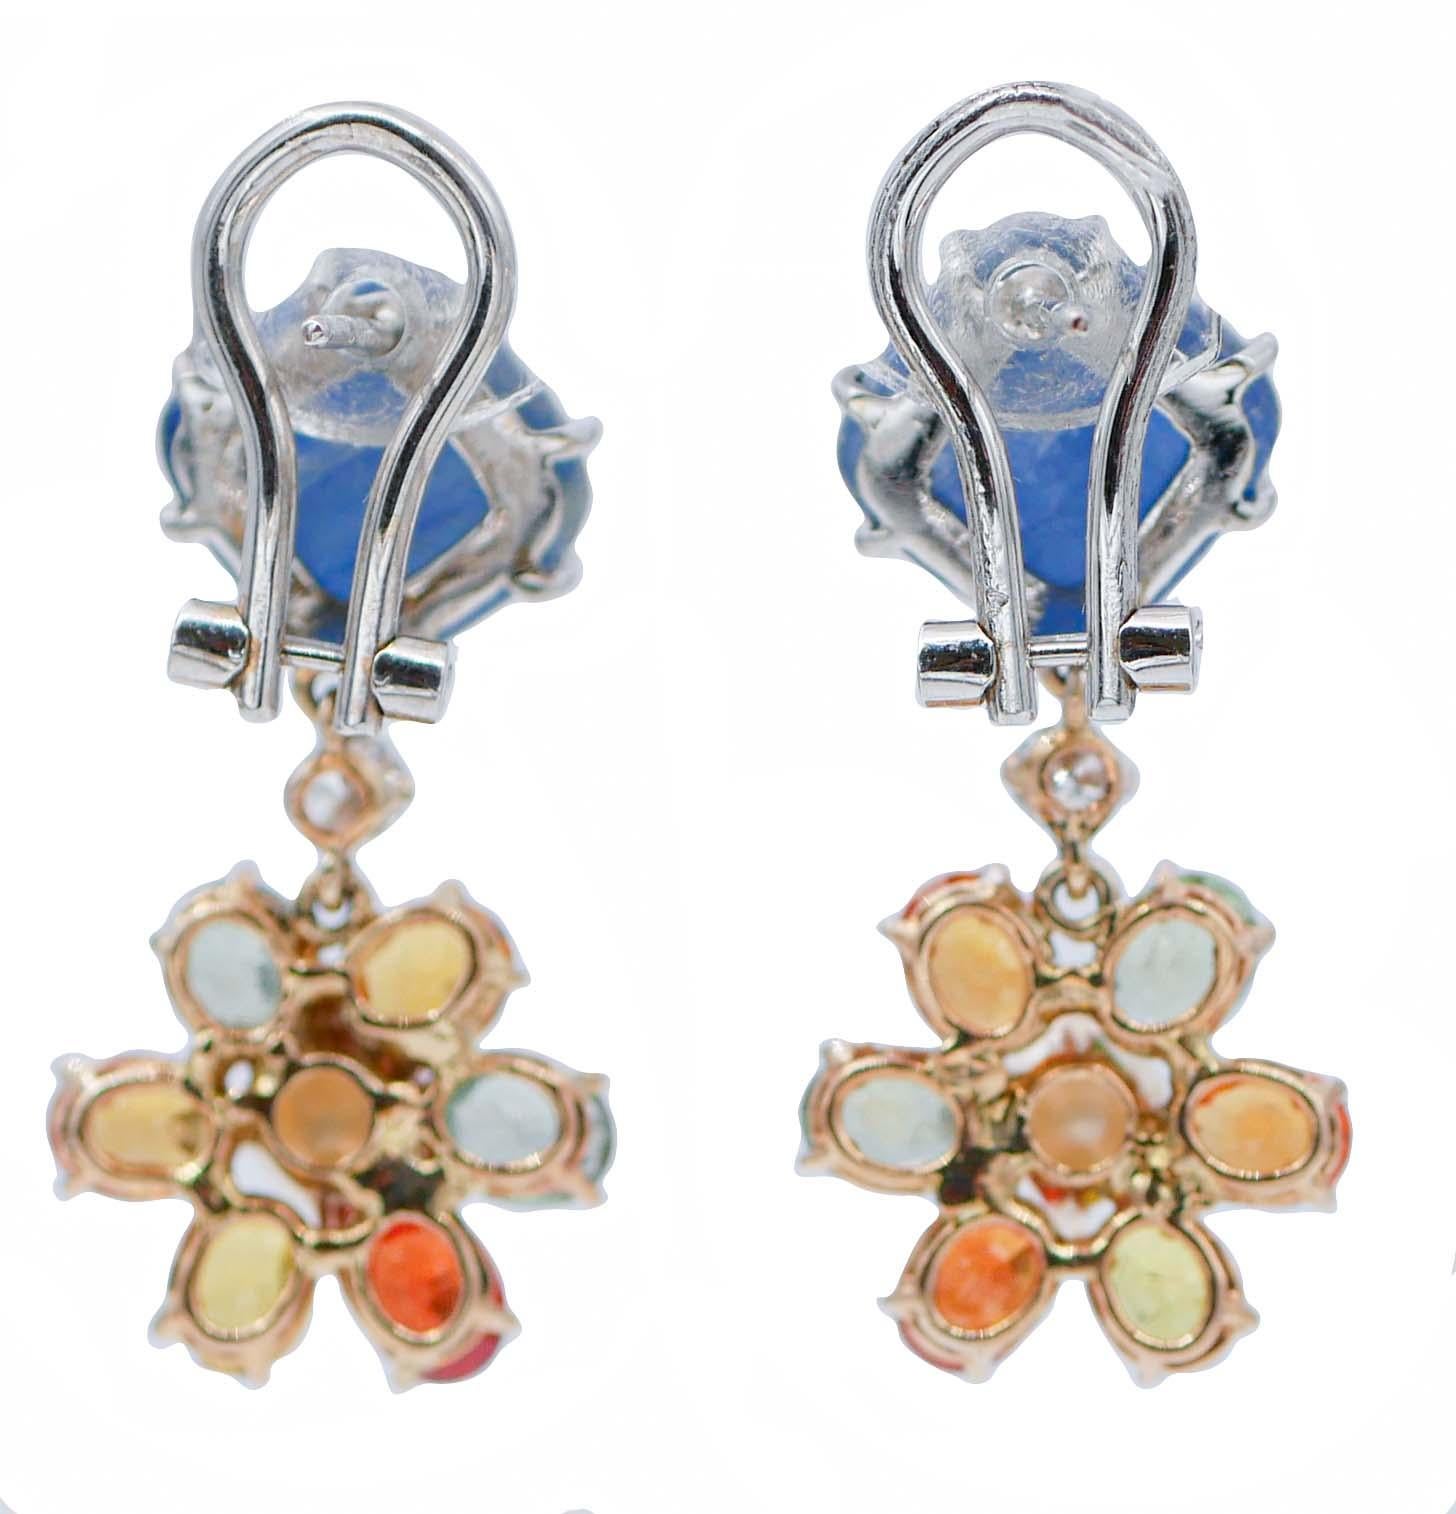 Retro Kyanite, Sappphires, Diamonds, Pearls, 14 Kt White and Rose Gold Earrings. For Sale